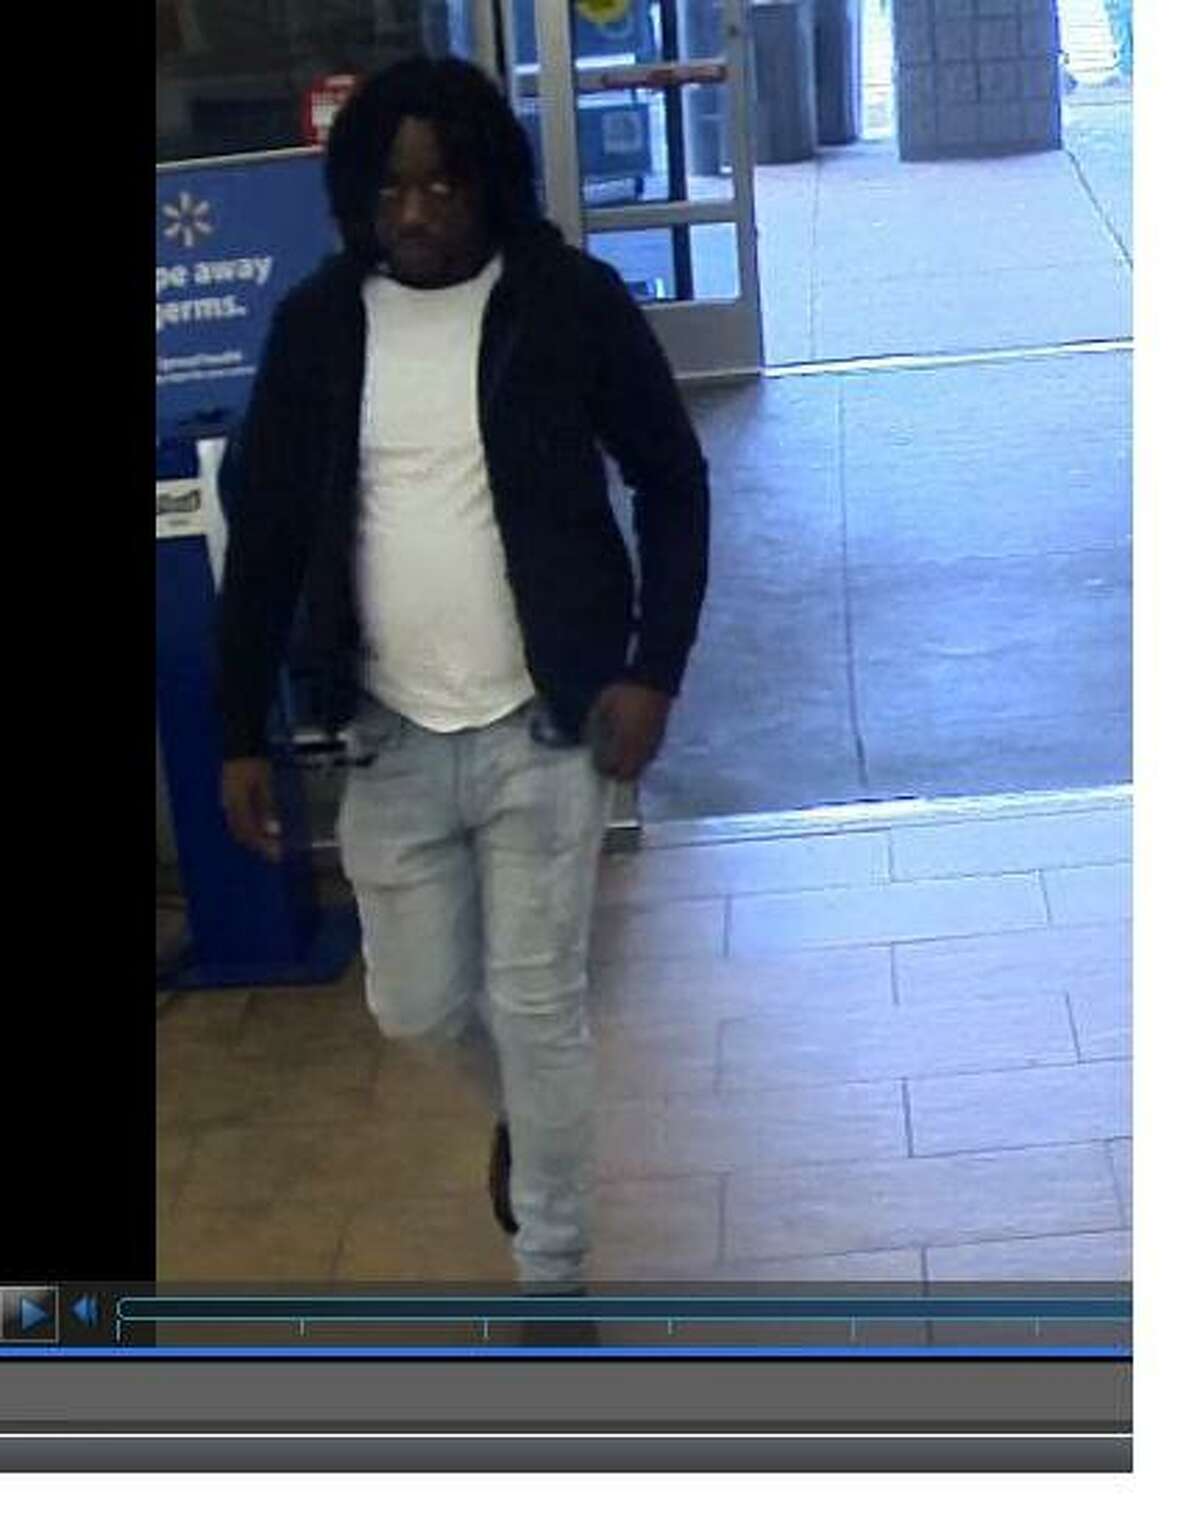 Hamden police are looking for help identifying a man who allegedly charged more than $1,000 worth of fraudulent purchases to a town resident's credit card.